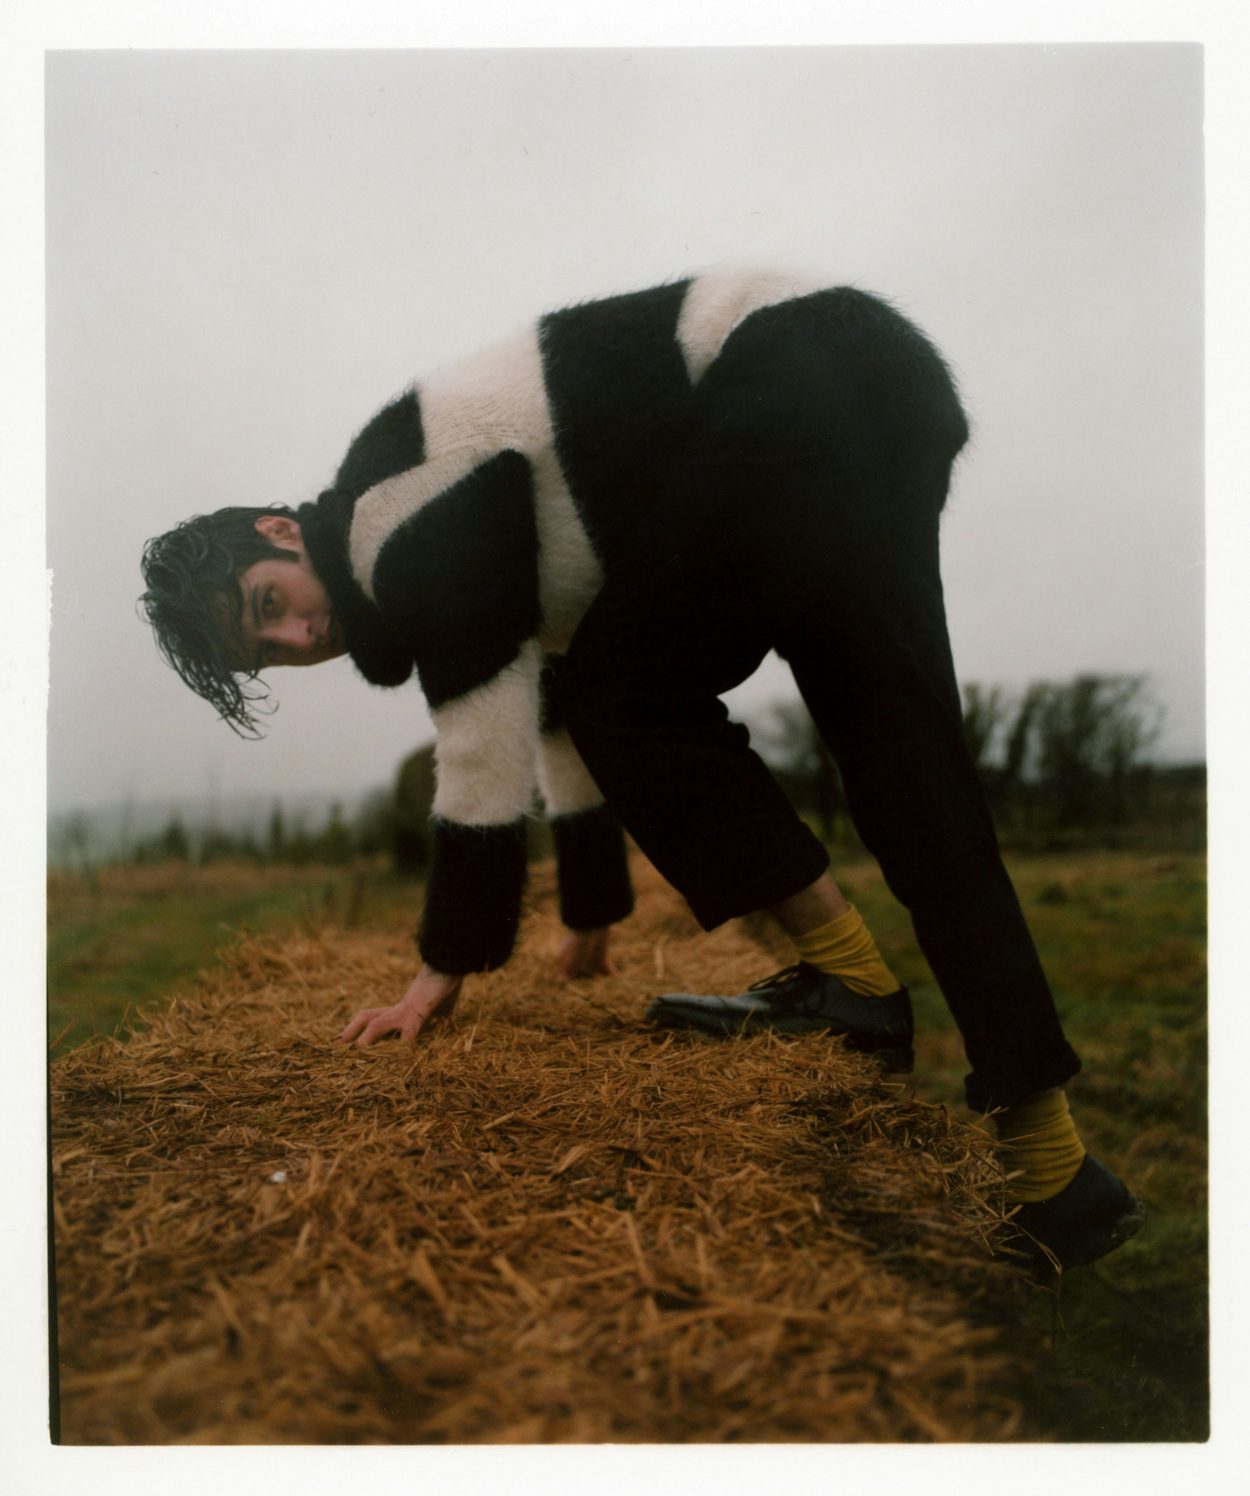 Photograph by Niall Hodson of a person wearing a black and white sweater climing in a field